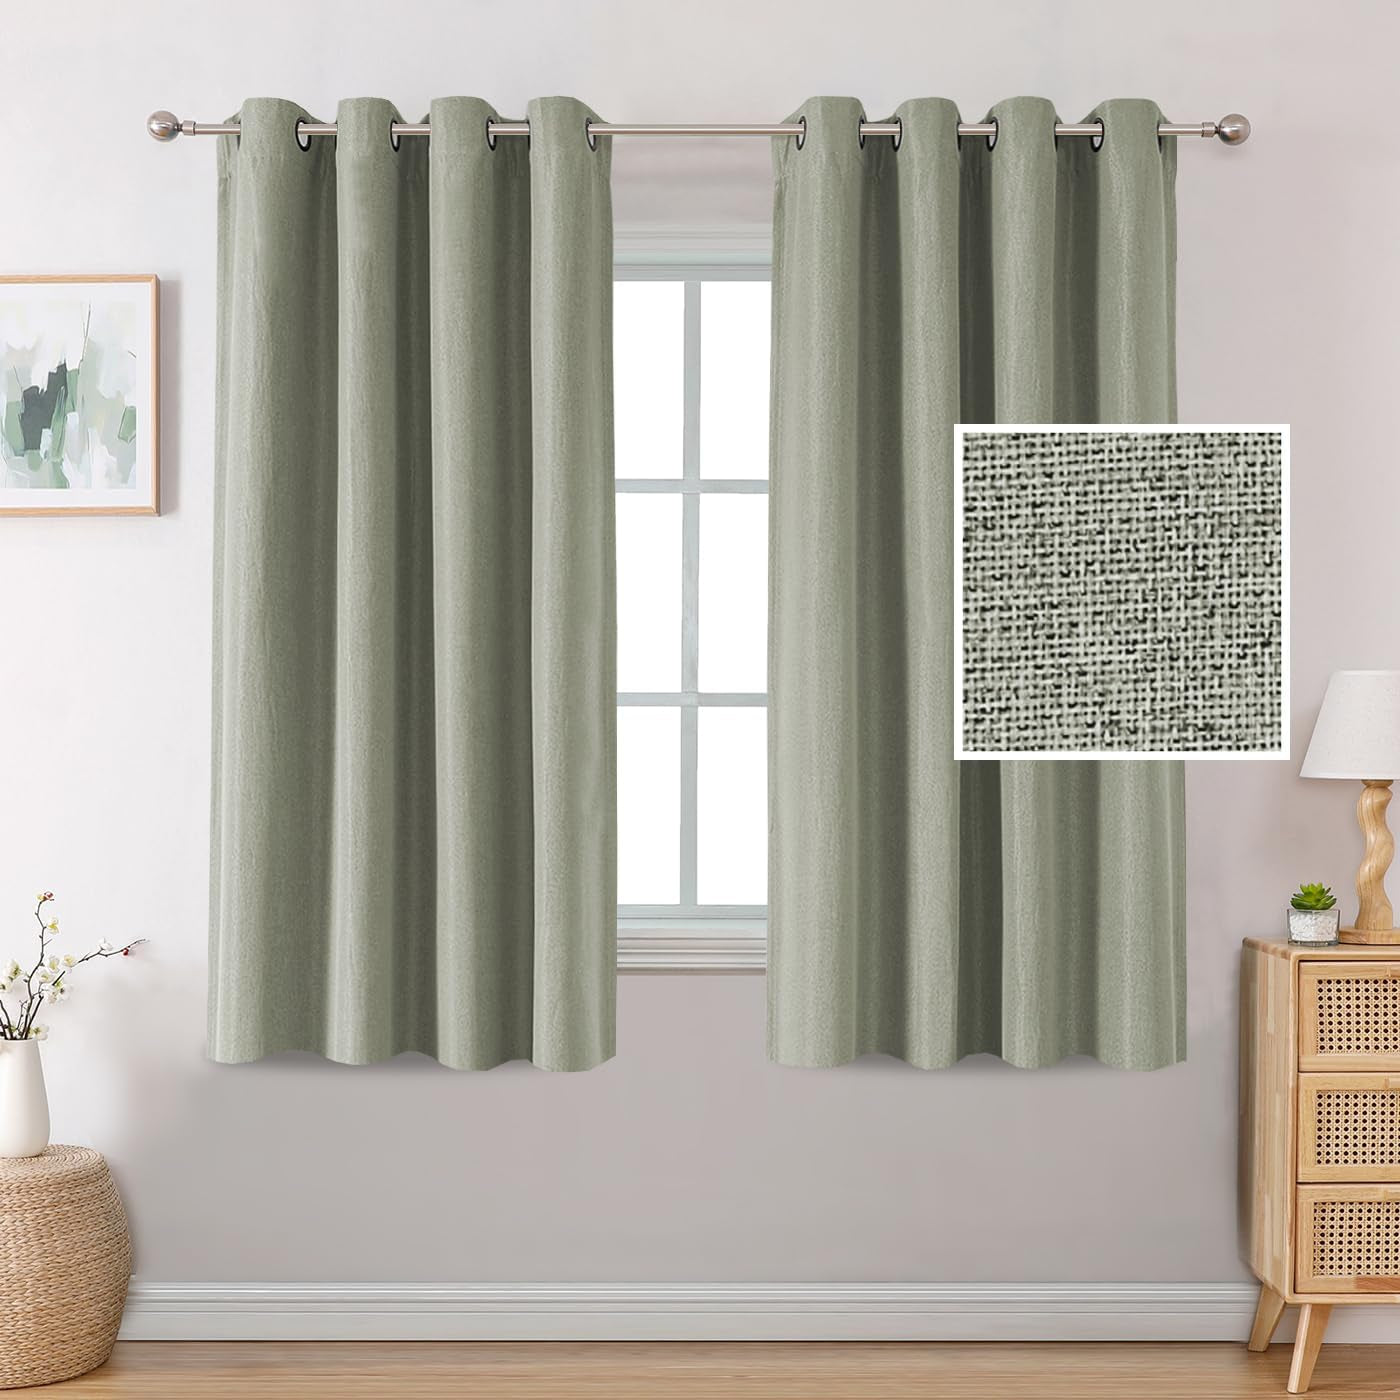 H.VERSAILTEX Linen Blackout Curtains 84 Inches Long Thermal Insulated Room Darkening Linen Curtains for Bedroom Textured Burlap Grommet Window Curtains for Living Room, Bluestone and Taupe, 2 Panels  H.VERSAILTEX Sage 52"W X 54"L 